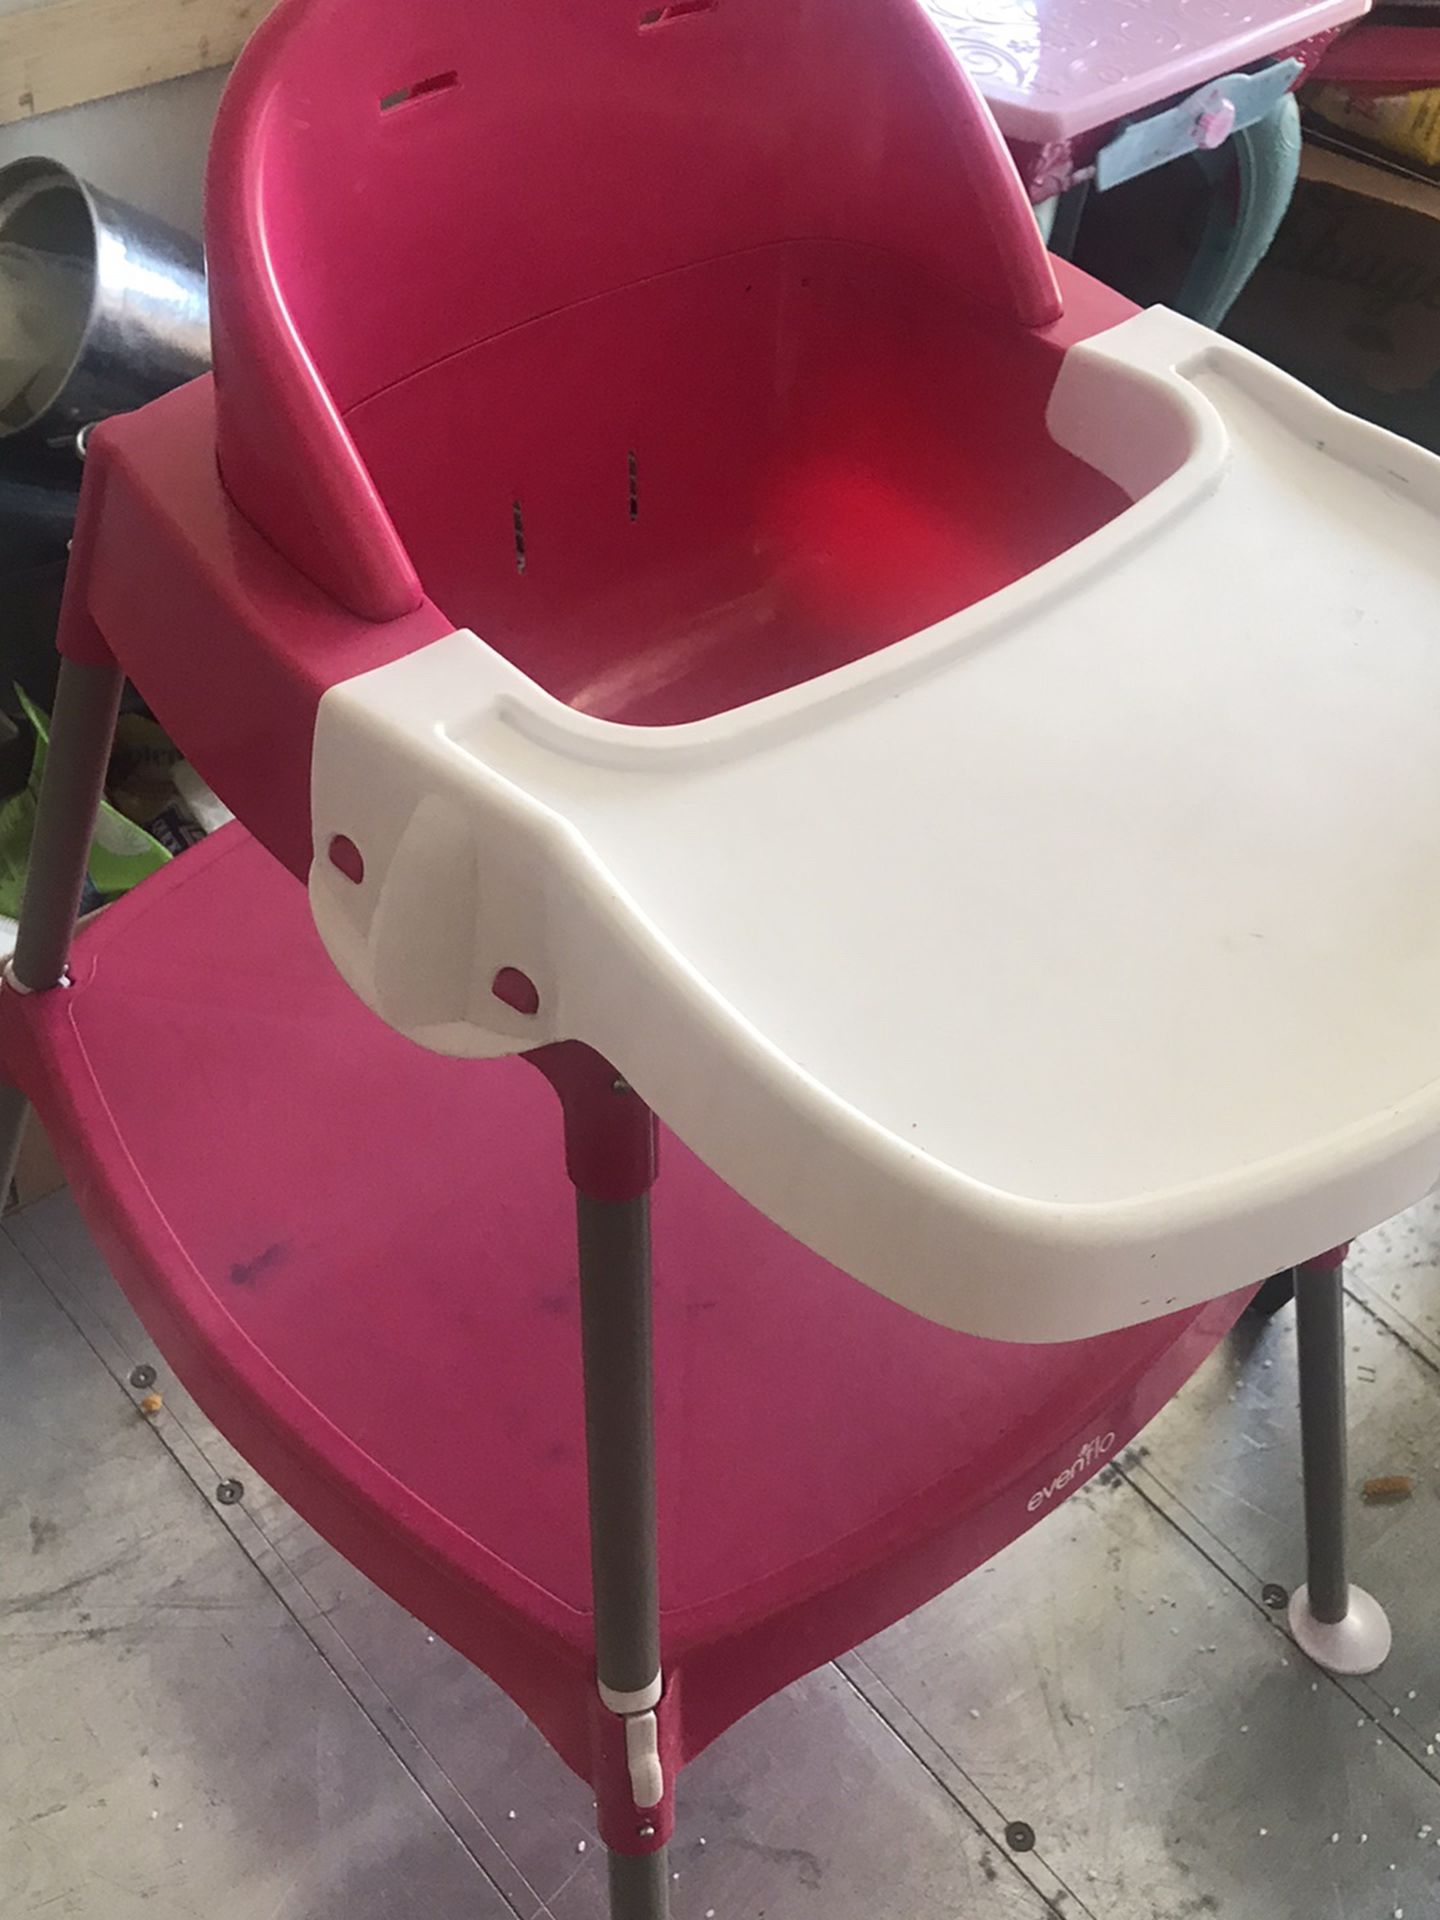 TWO- Piece Highchair